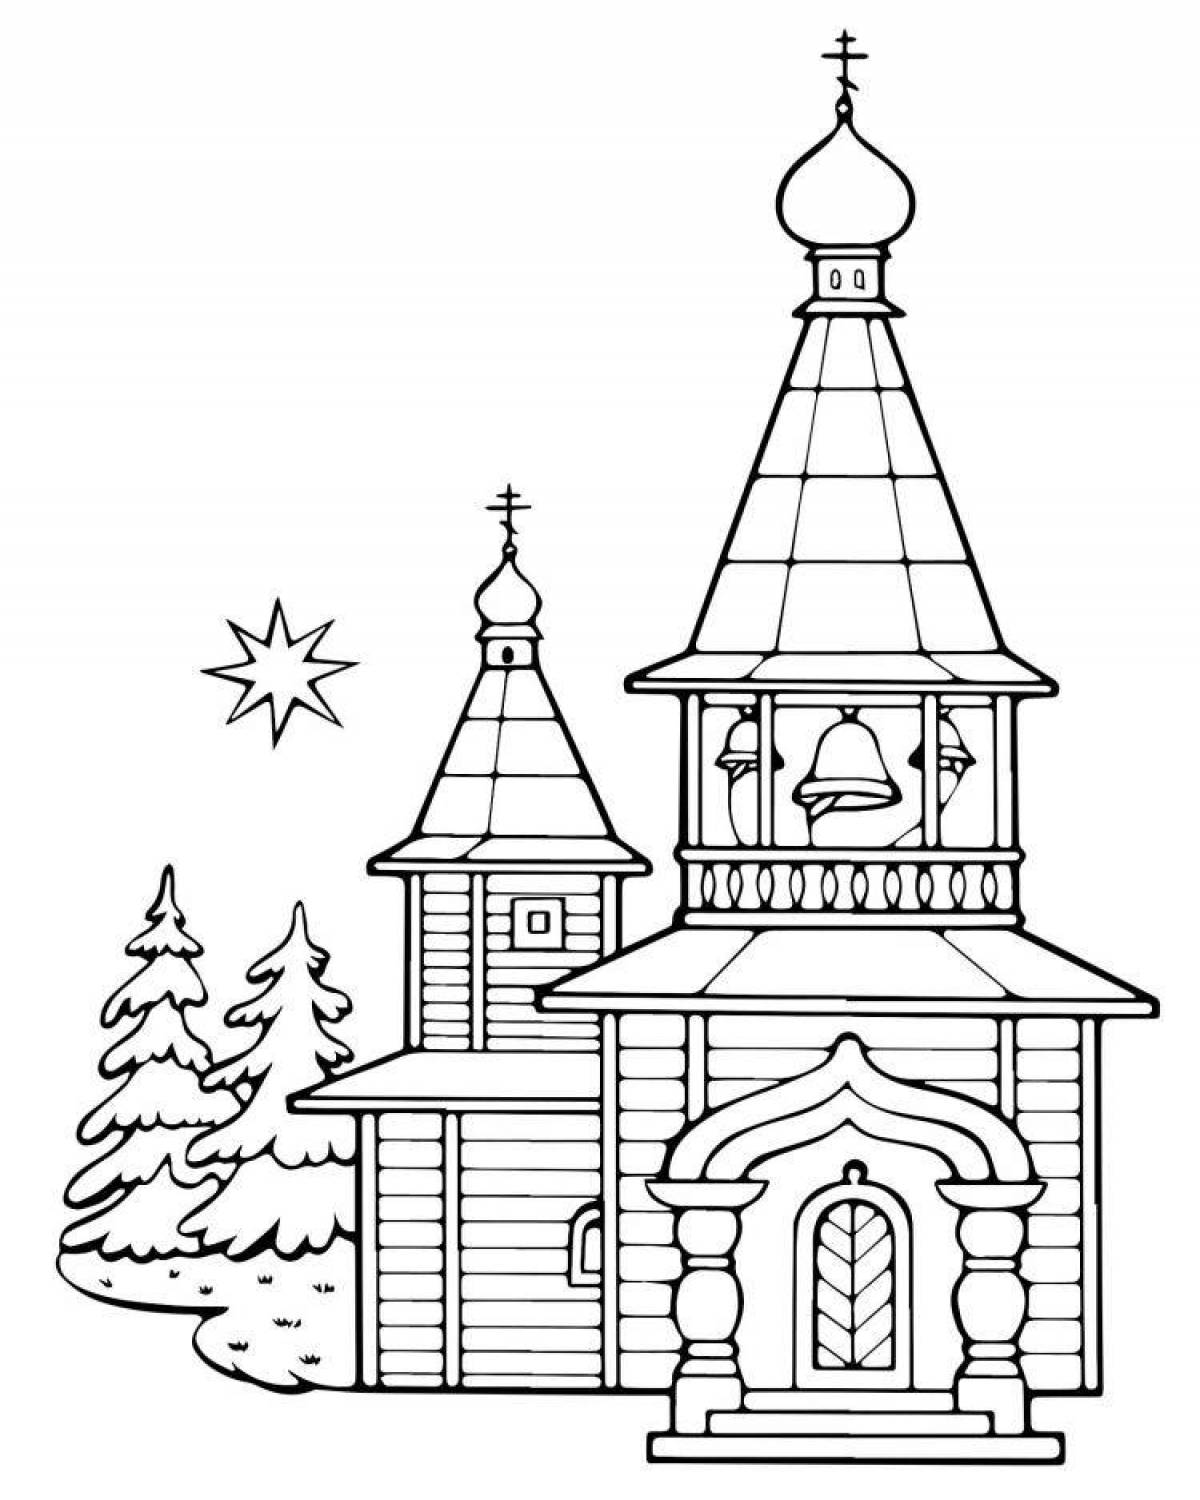 Shining temples and churches coloring pages for kids